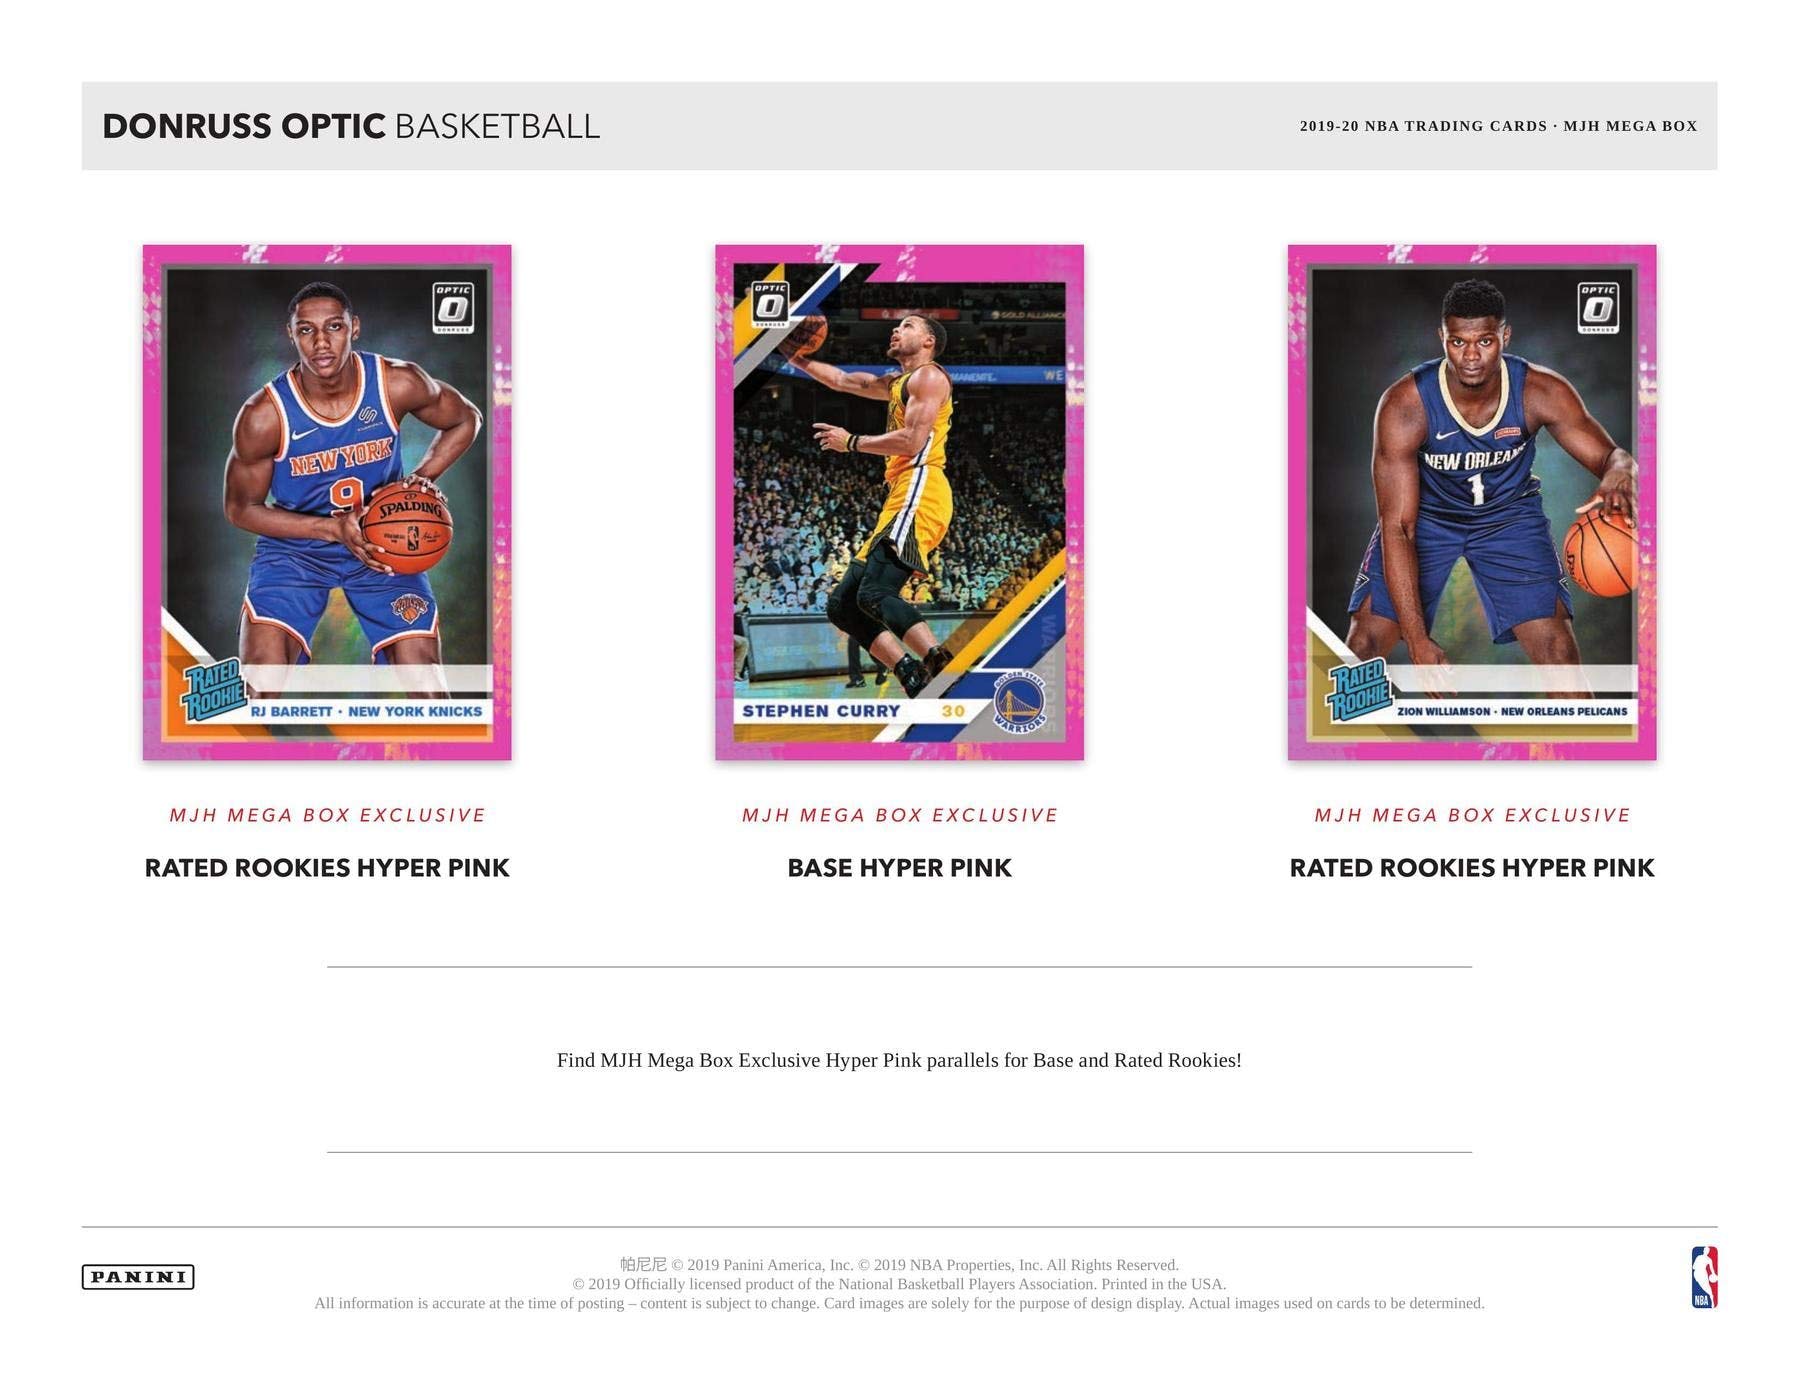 2019-20 Panini Donruss Optic MEGA Basketball Card Box - With 10 Hyper Pink Prizms - Look for Valuable Zion Williamson Holo Rookie Cards! 42 Cards Per Box.